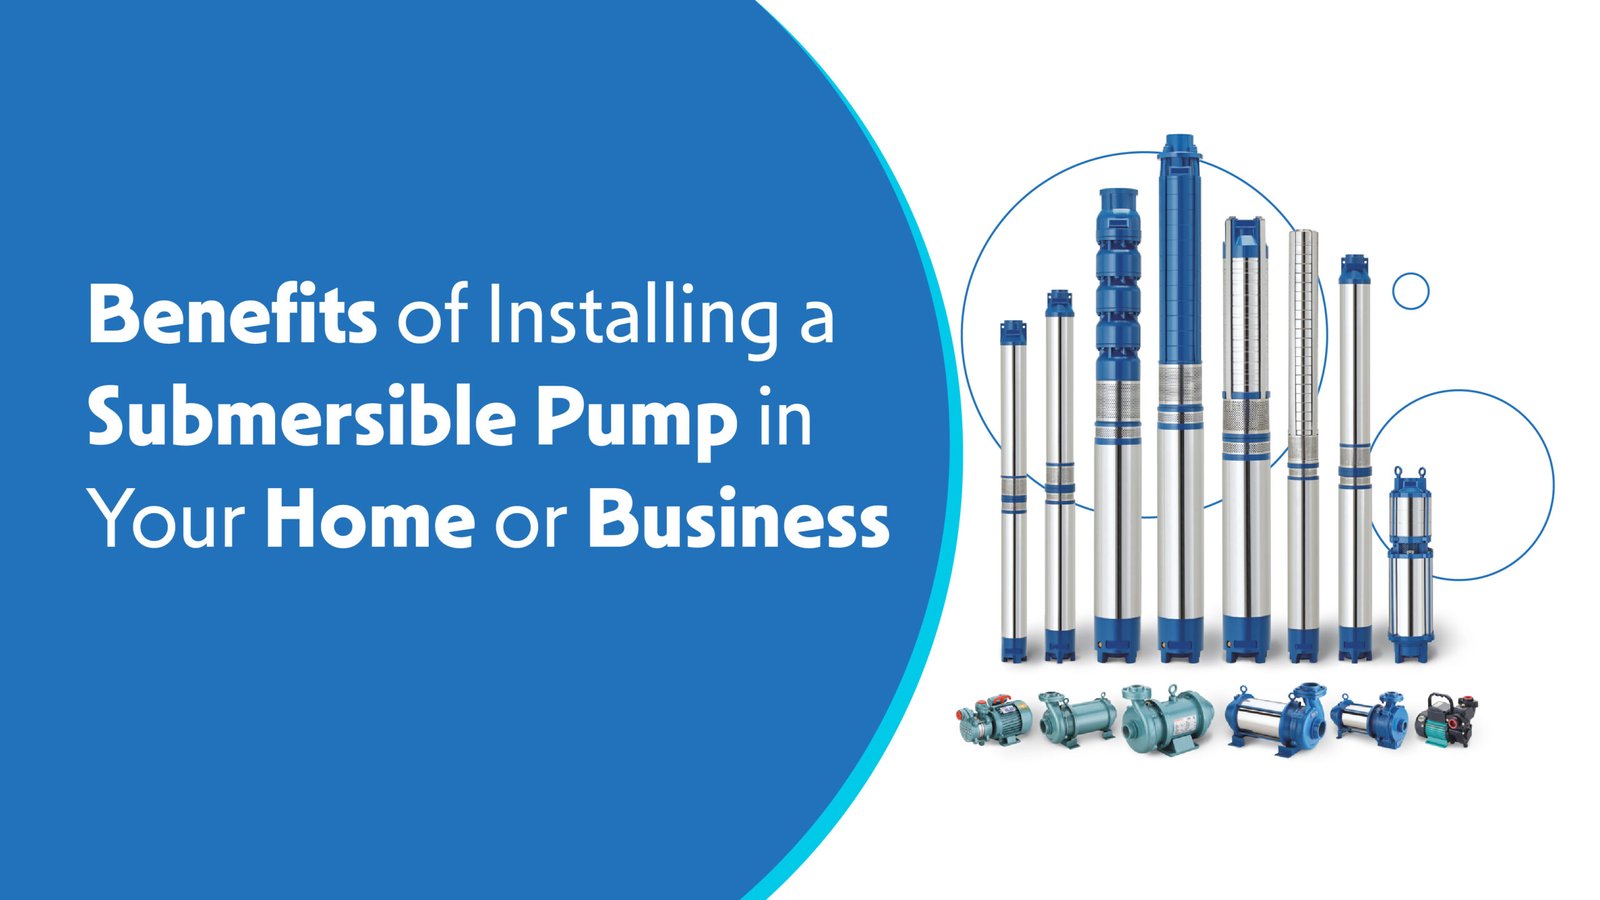 Benefits of Installing a Submersible Pump in Your Home or Business